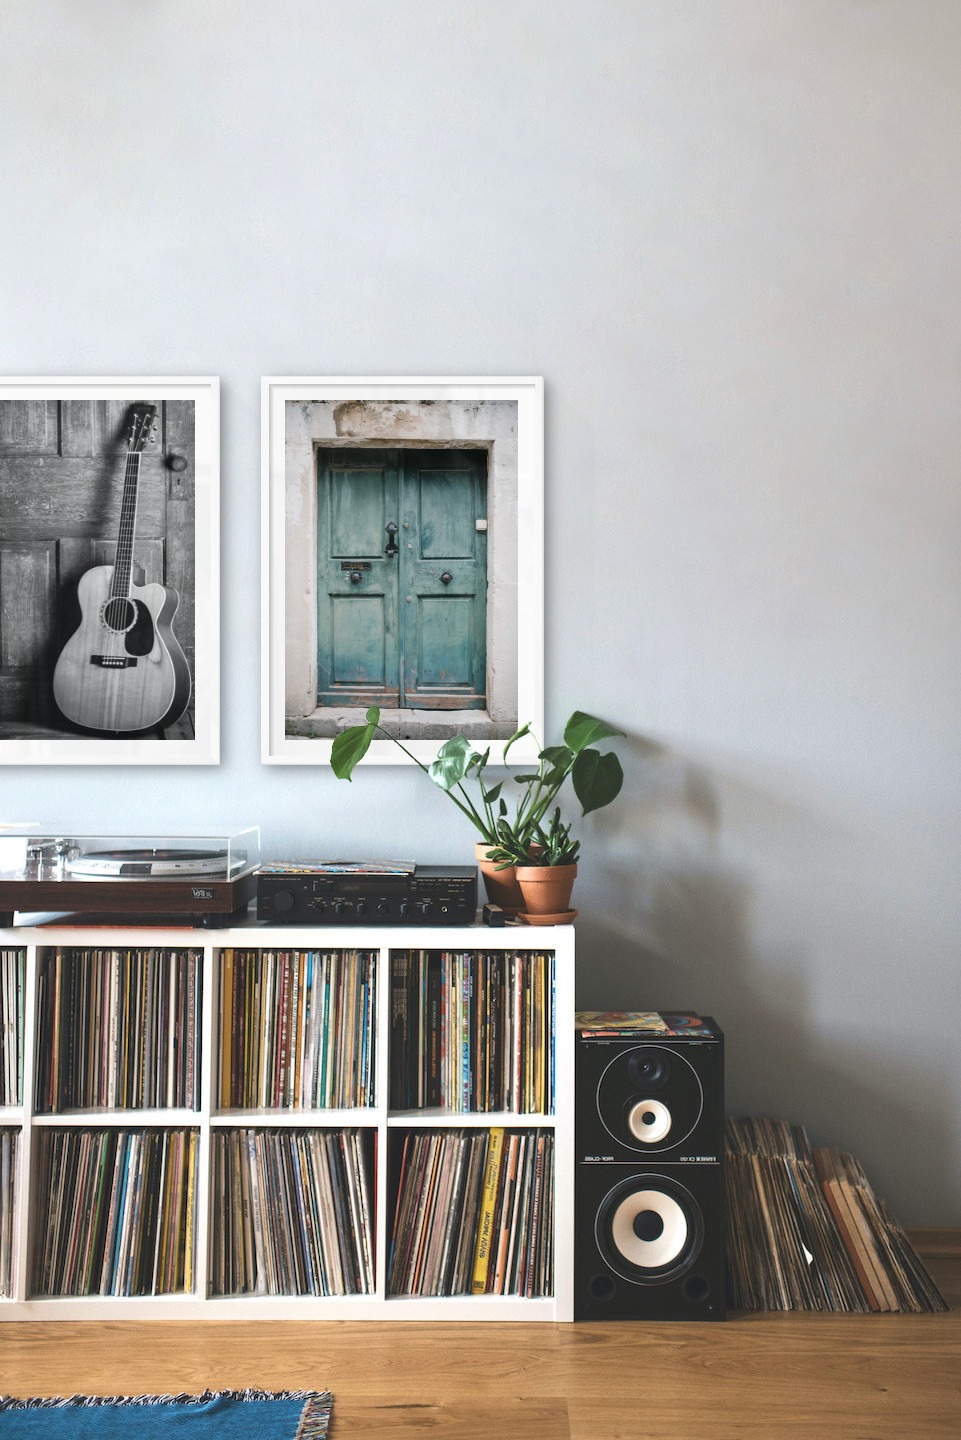 Gallery wall with picture frames in white in sizes 50x70 with prints "Guitar" and "Door"